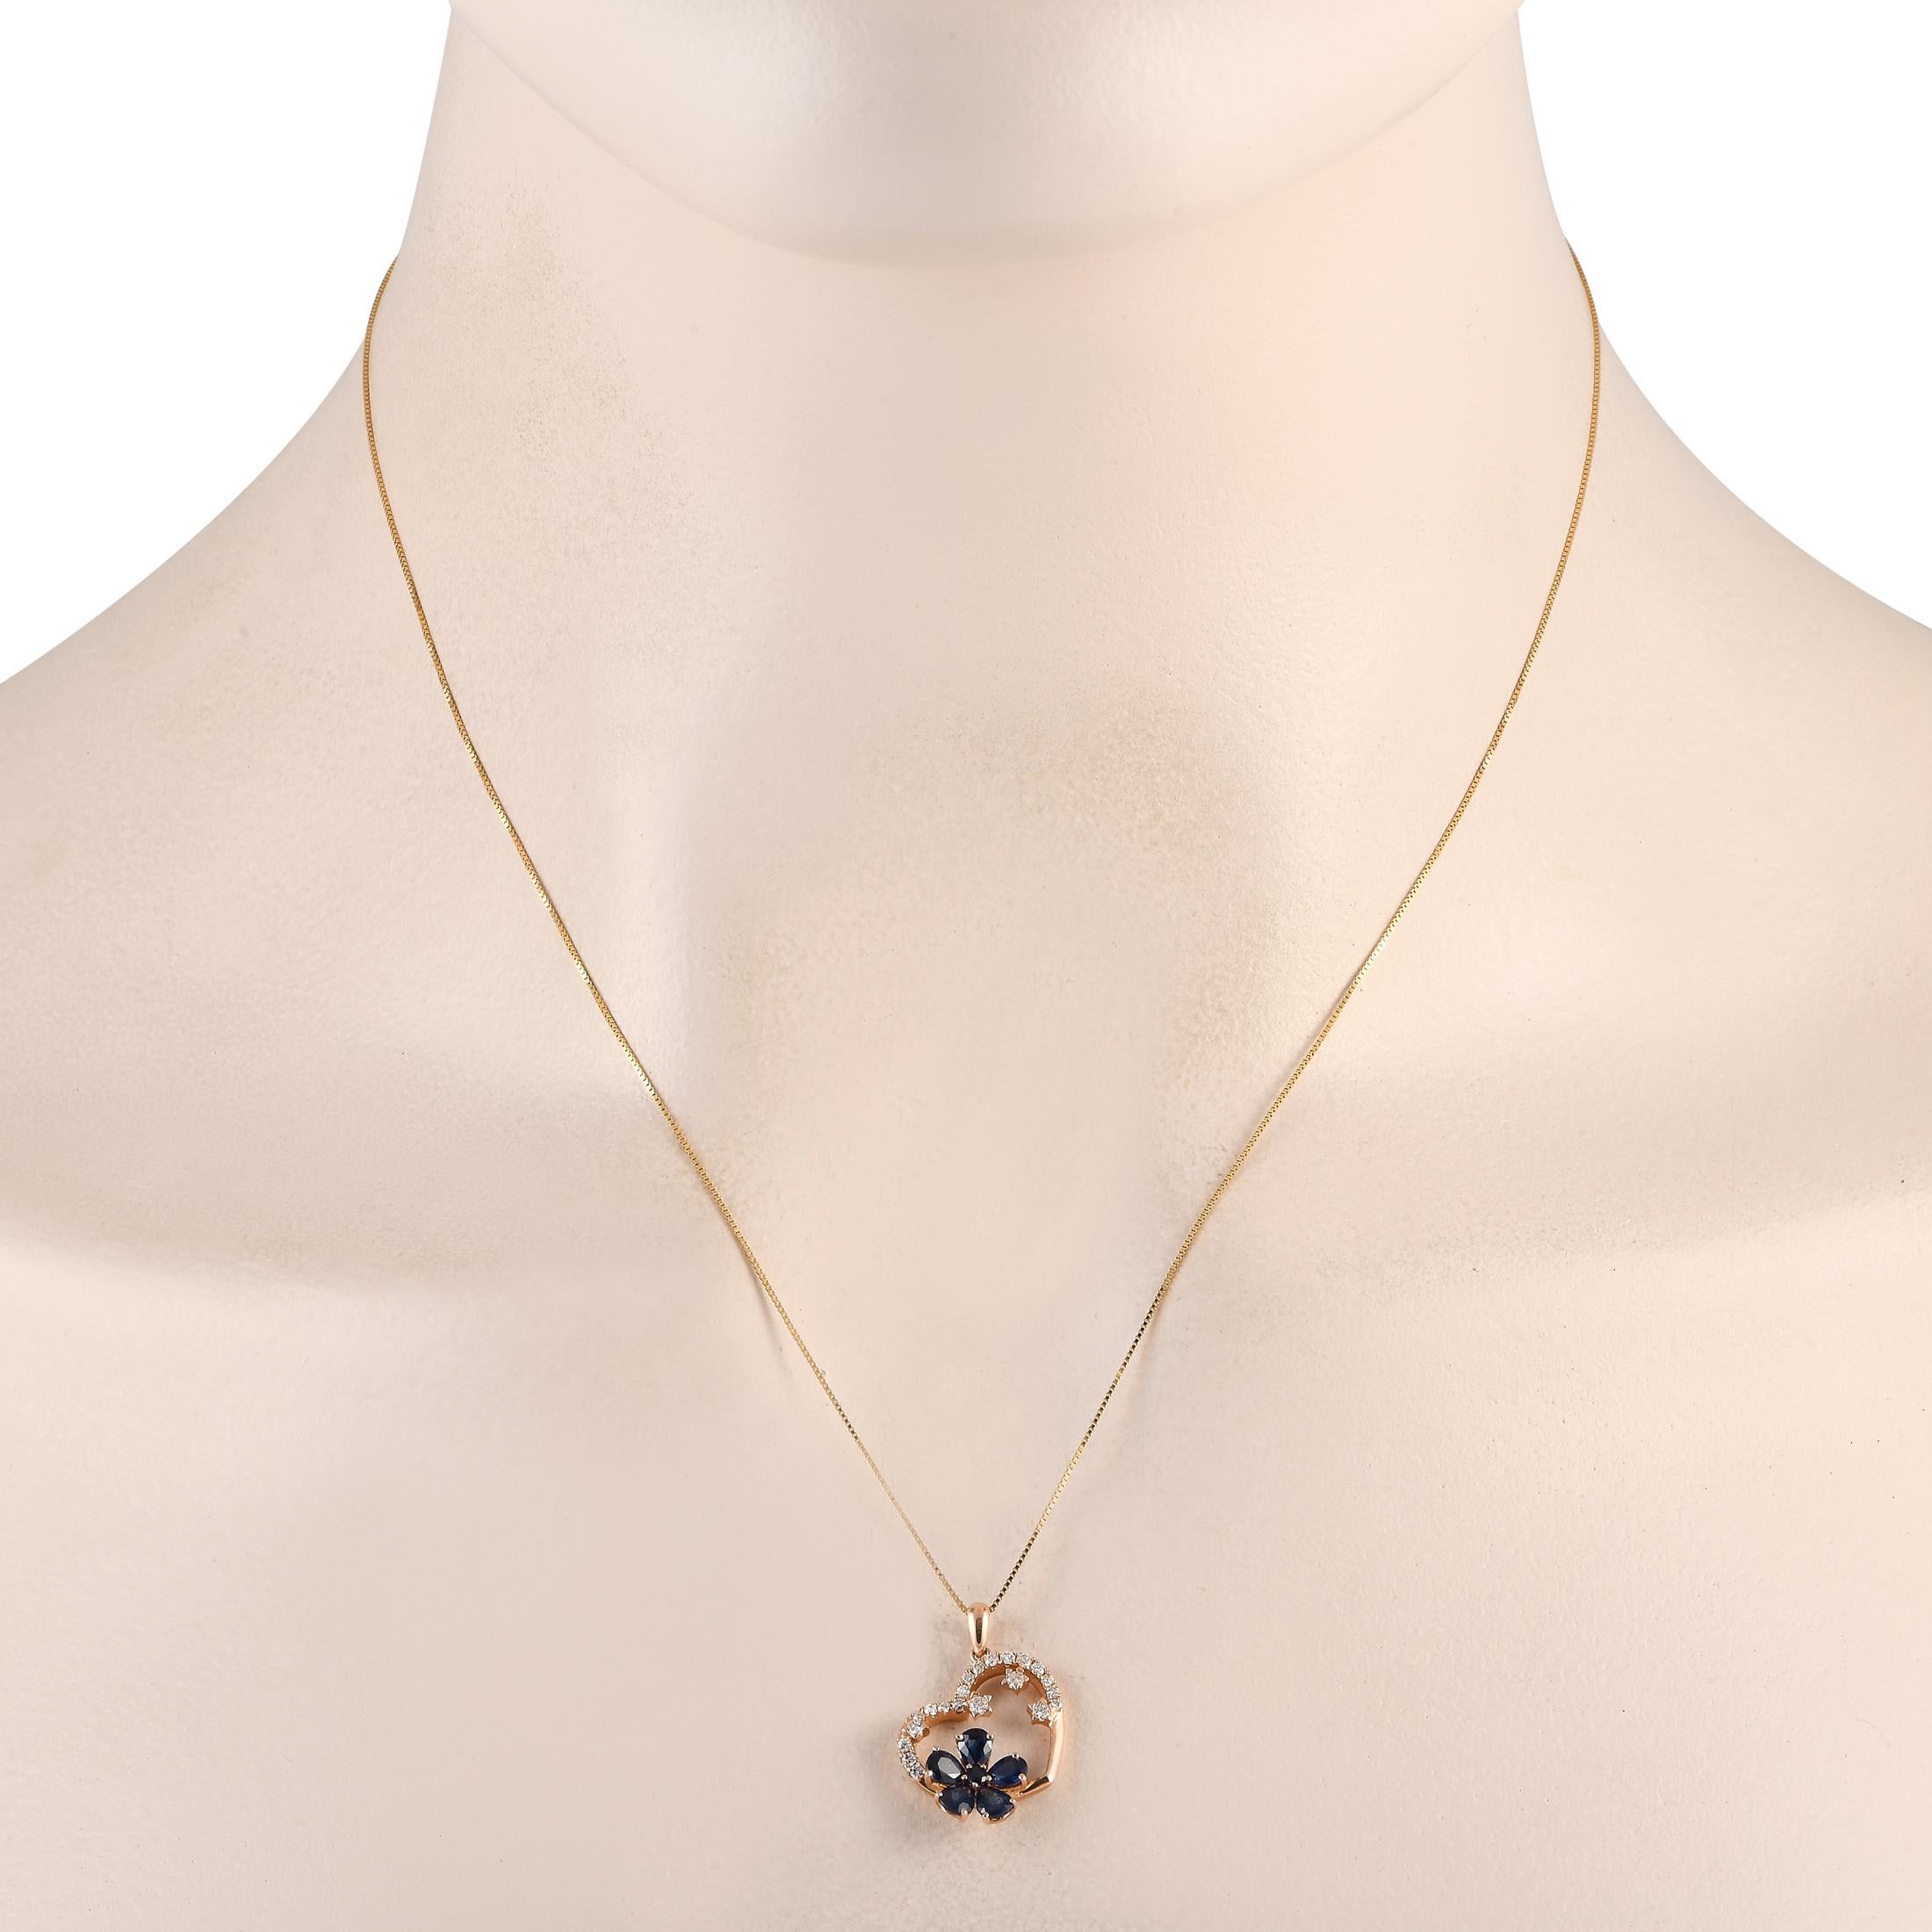 A charming heart-shaped pendant makes a statement on this luxurious necklace. Crafted from opulent 14K Yellow Gold, the pendant measures 0.85 long by 0.65 wide and is suspended from an 18 chain. Its adorned with a floral motif accented with Sapphire